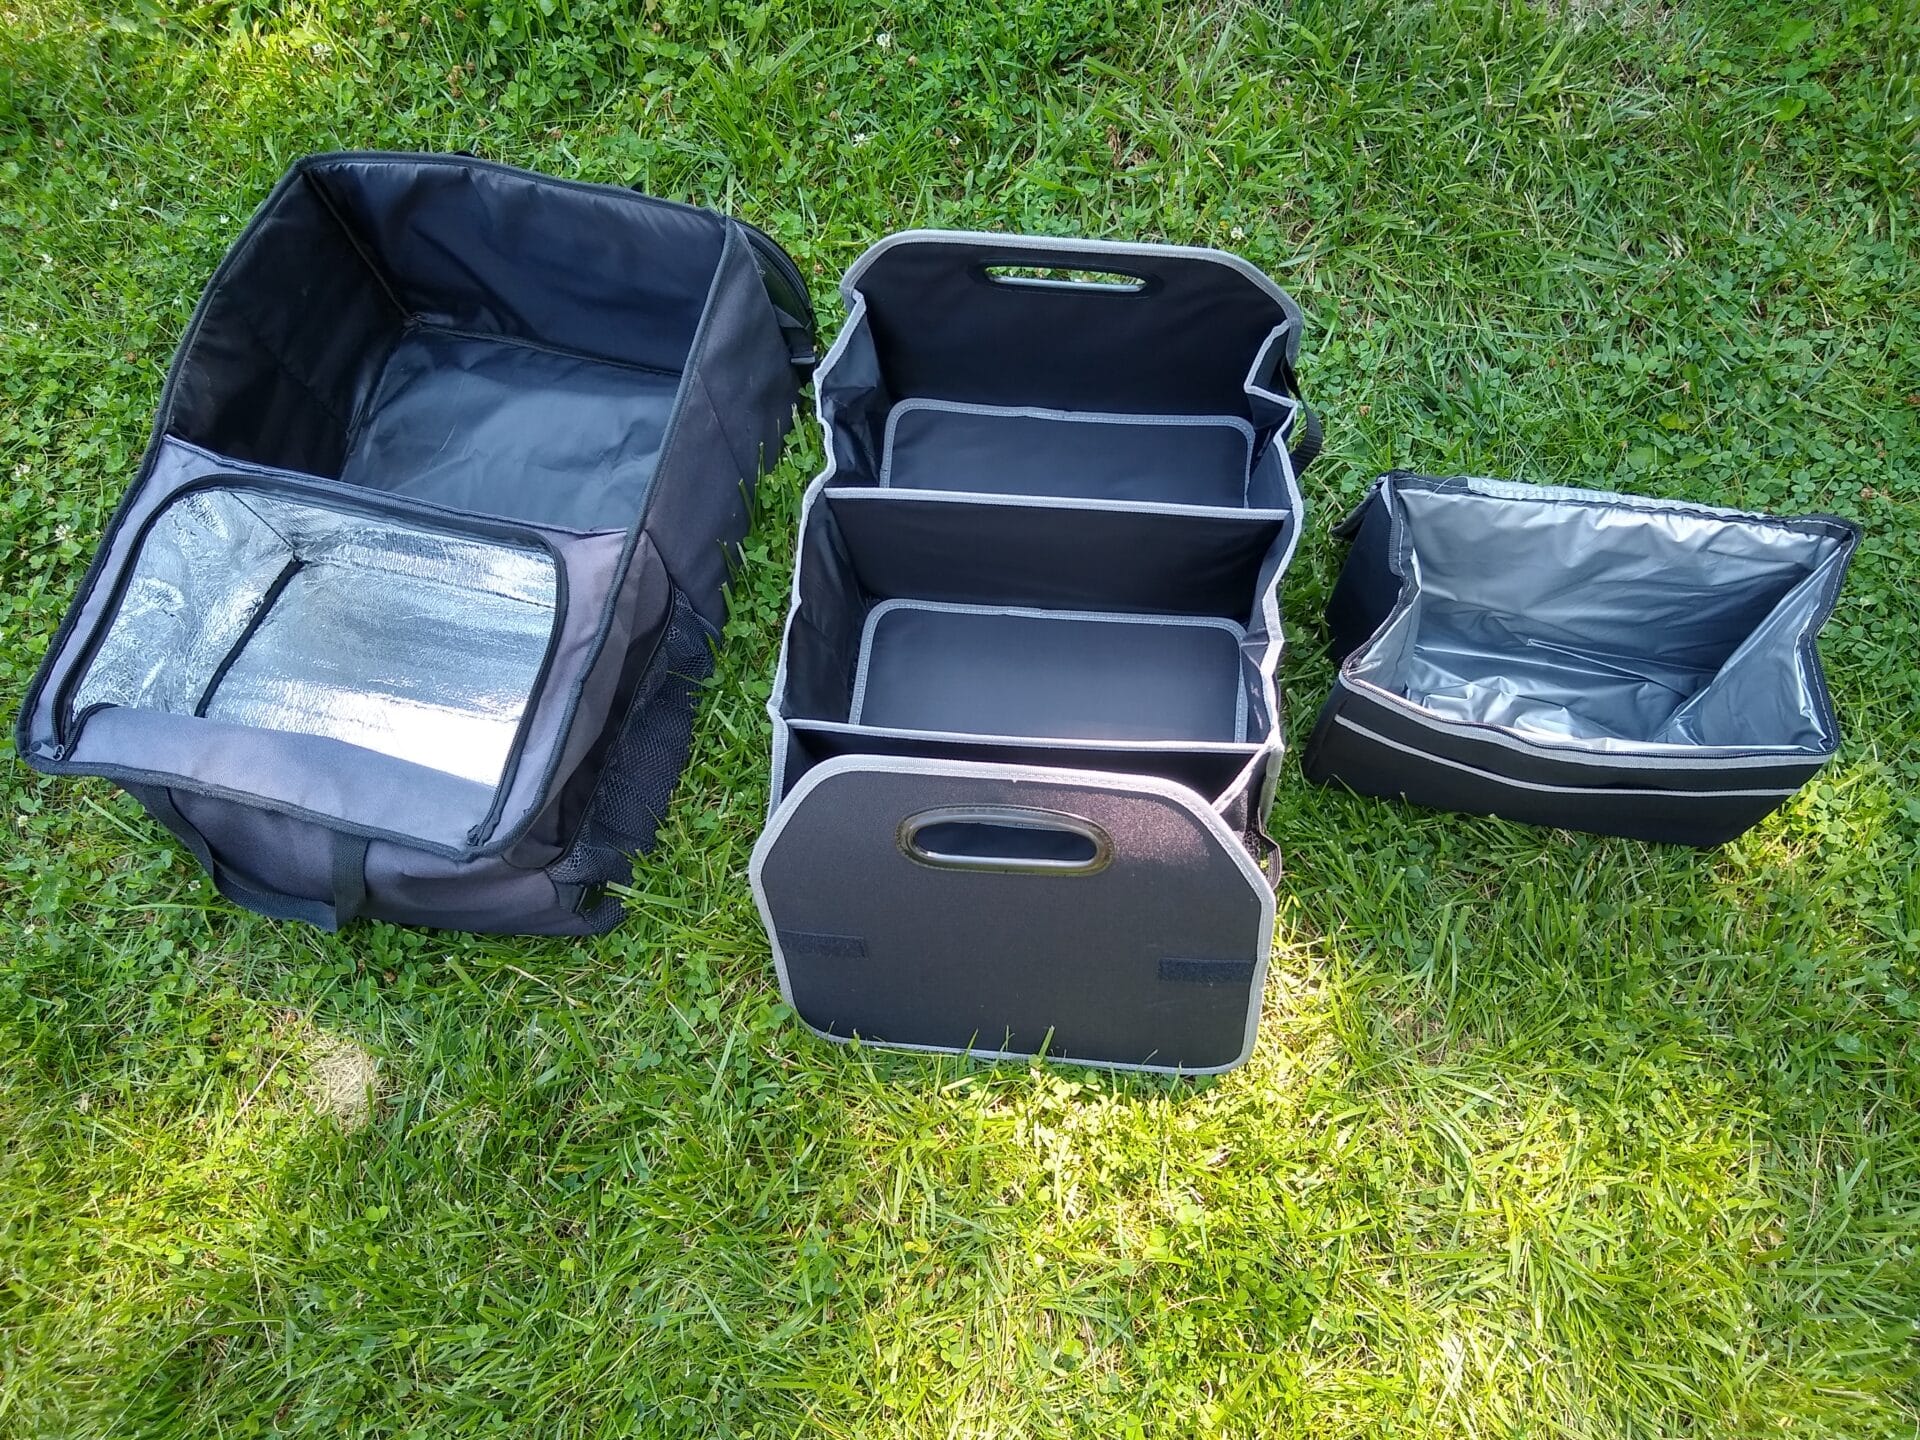 Shelby Trunk Organizer with Cooler